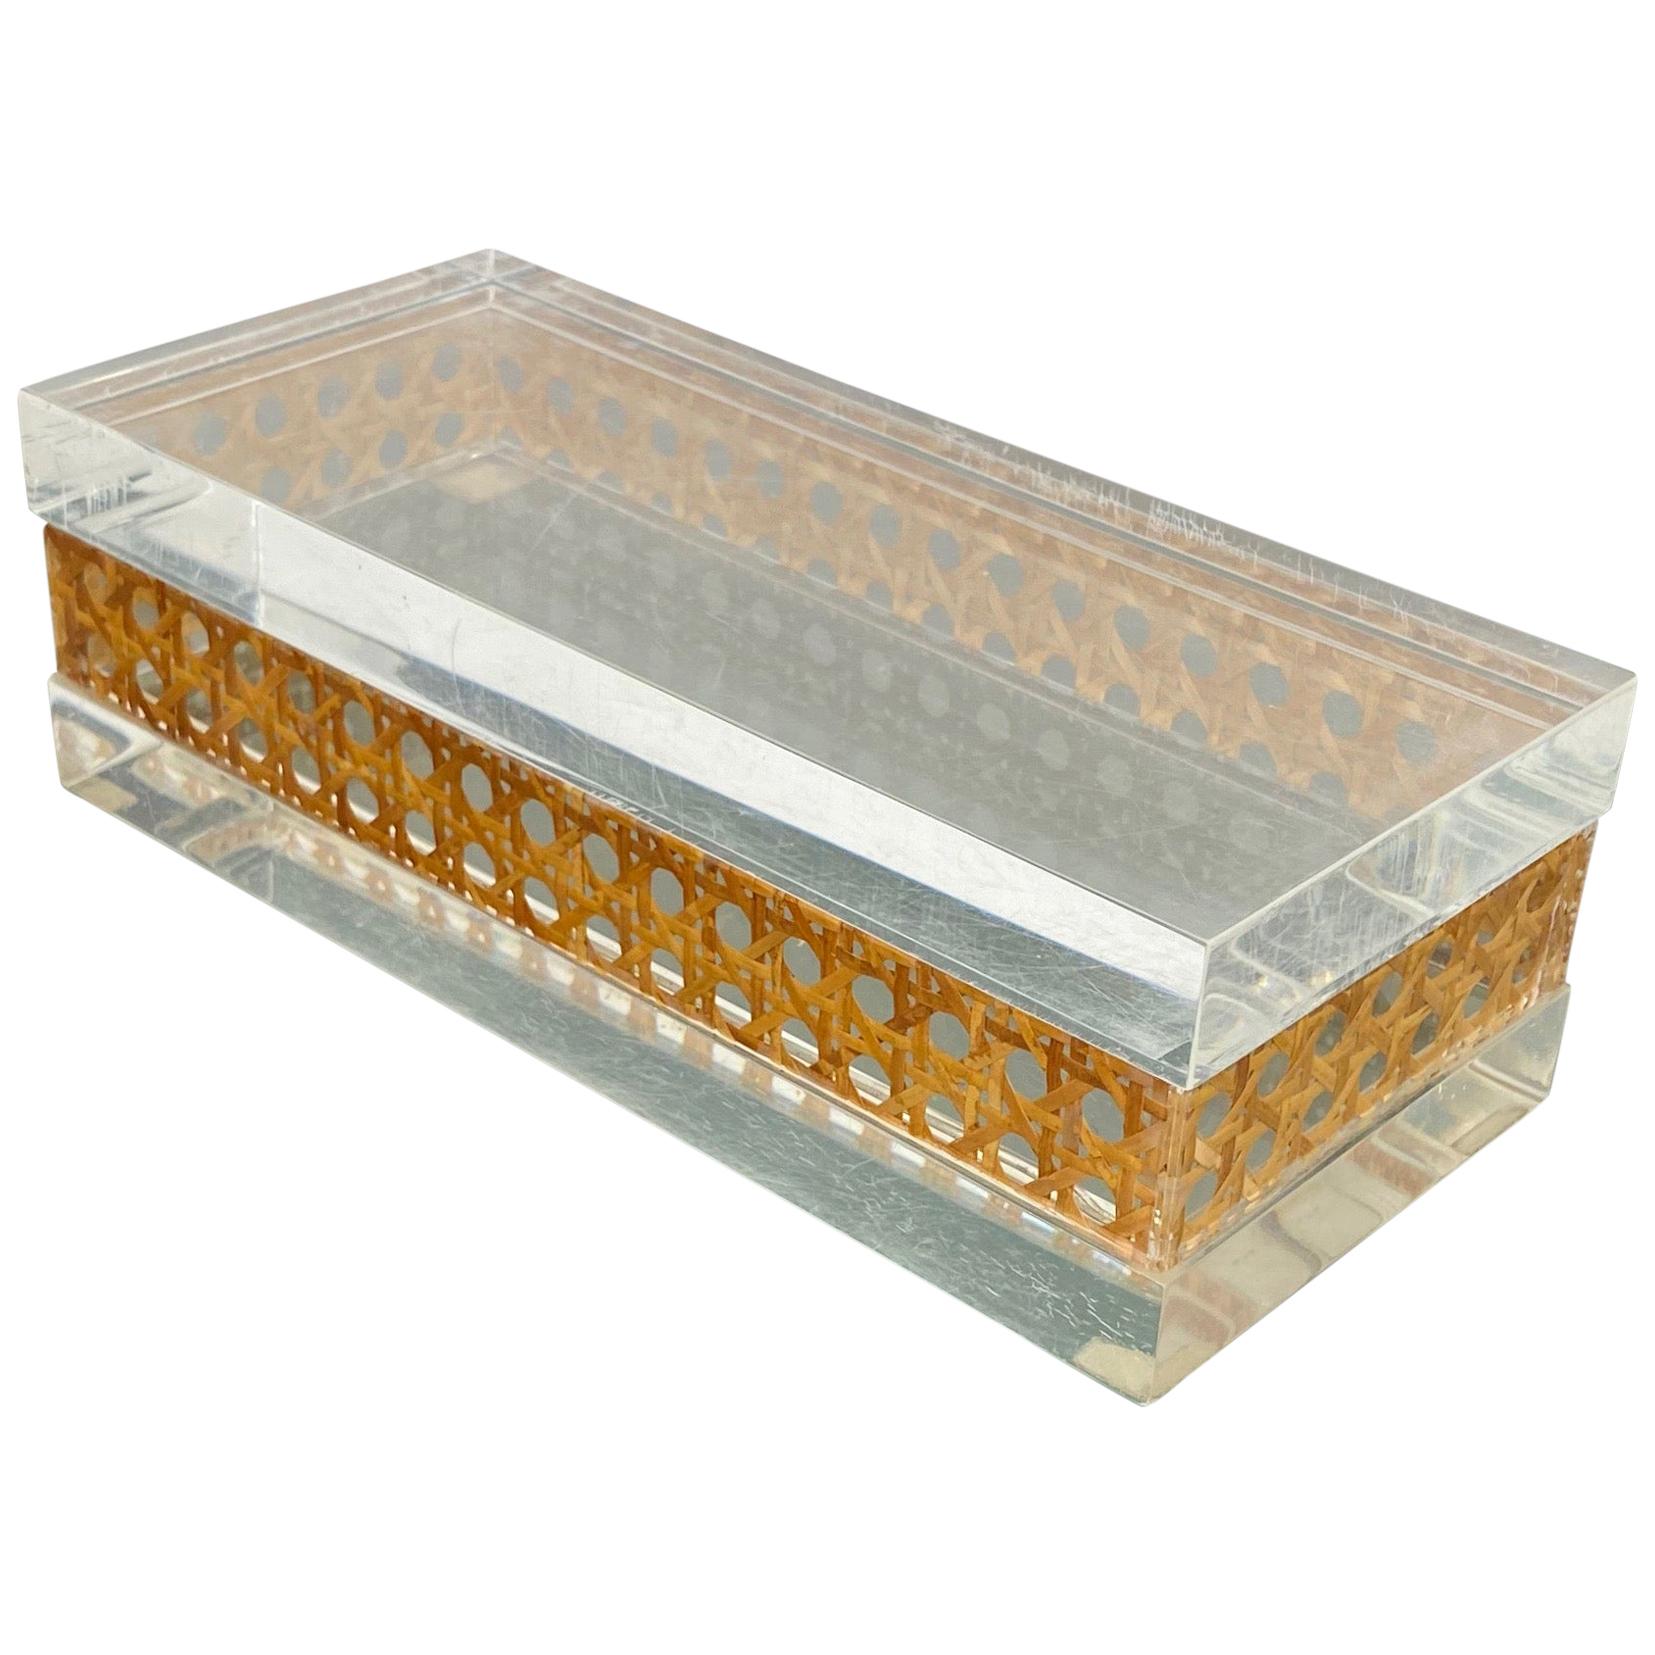 1970s Christian Dior Lucite Decorative Box with Wicker Rattan Canework, France